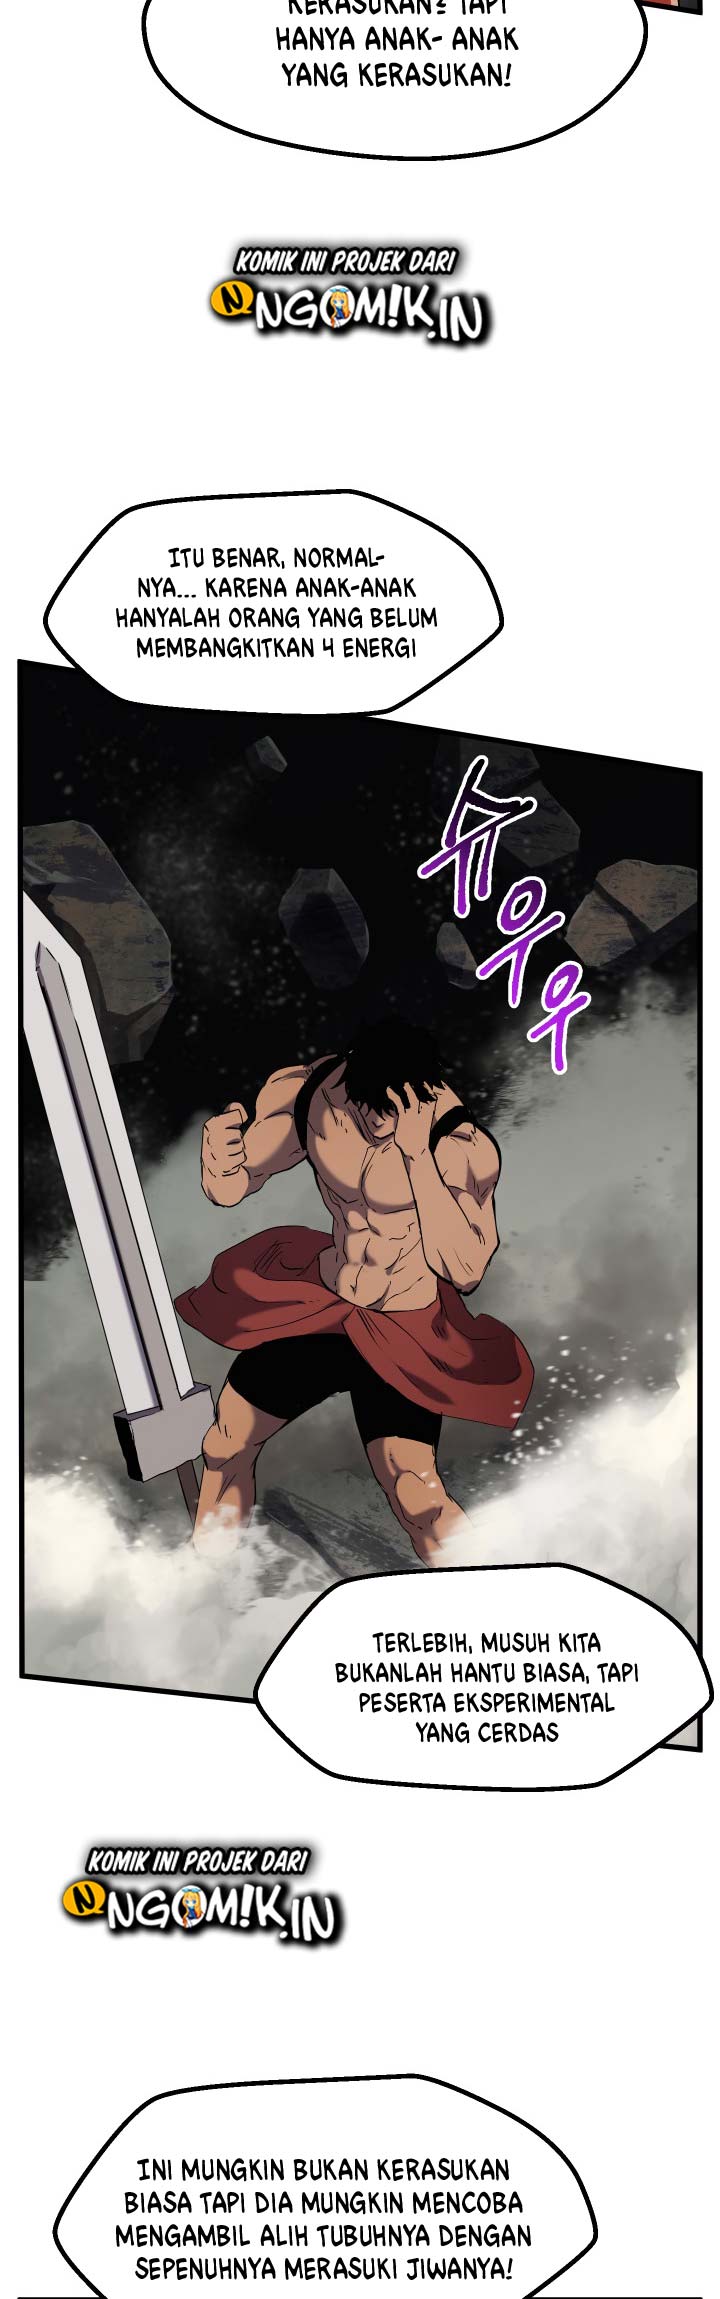 Otherworldly Sword King’s Survival Records Chapter 48